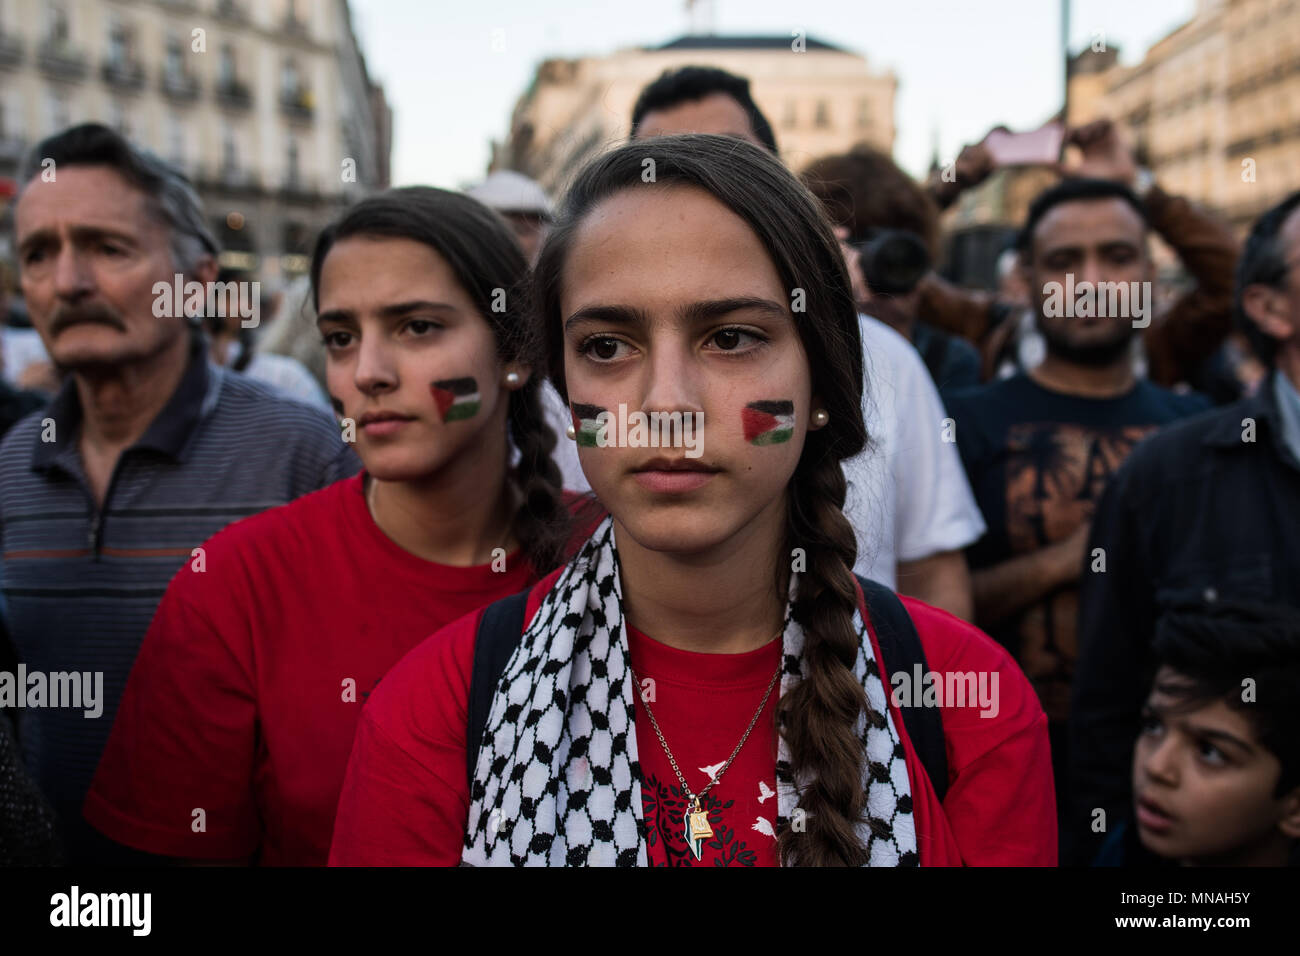 Madrid, Spain. 15th May, 2018. Two young women protesting against the last deaths in Gaza Strip coinciding with the Nakba Day. Palestinians have showed solidarity the day after Israeli army killed dozens of Palestinians protesting in Gaza for the new US embassy in Jerusalem. Madrid, Spain. Credit: Marcos del Mazo/Alamy Live News Stock Photo